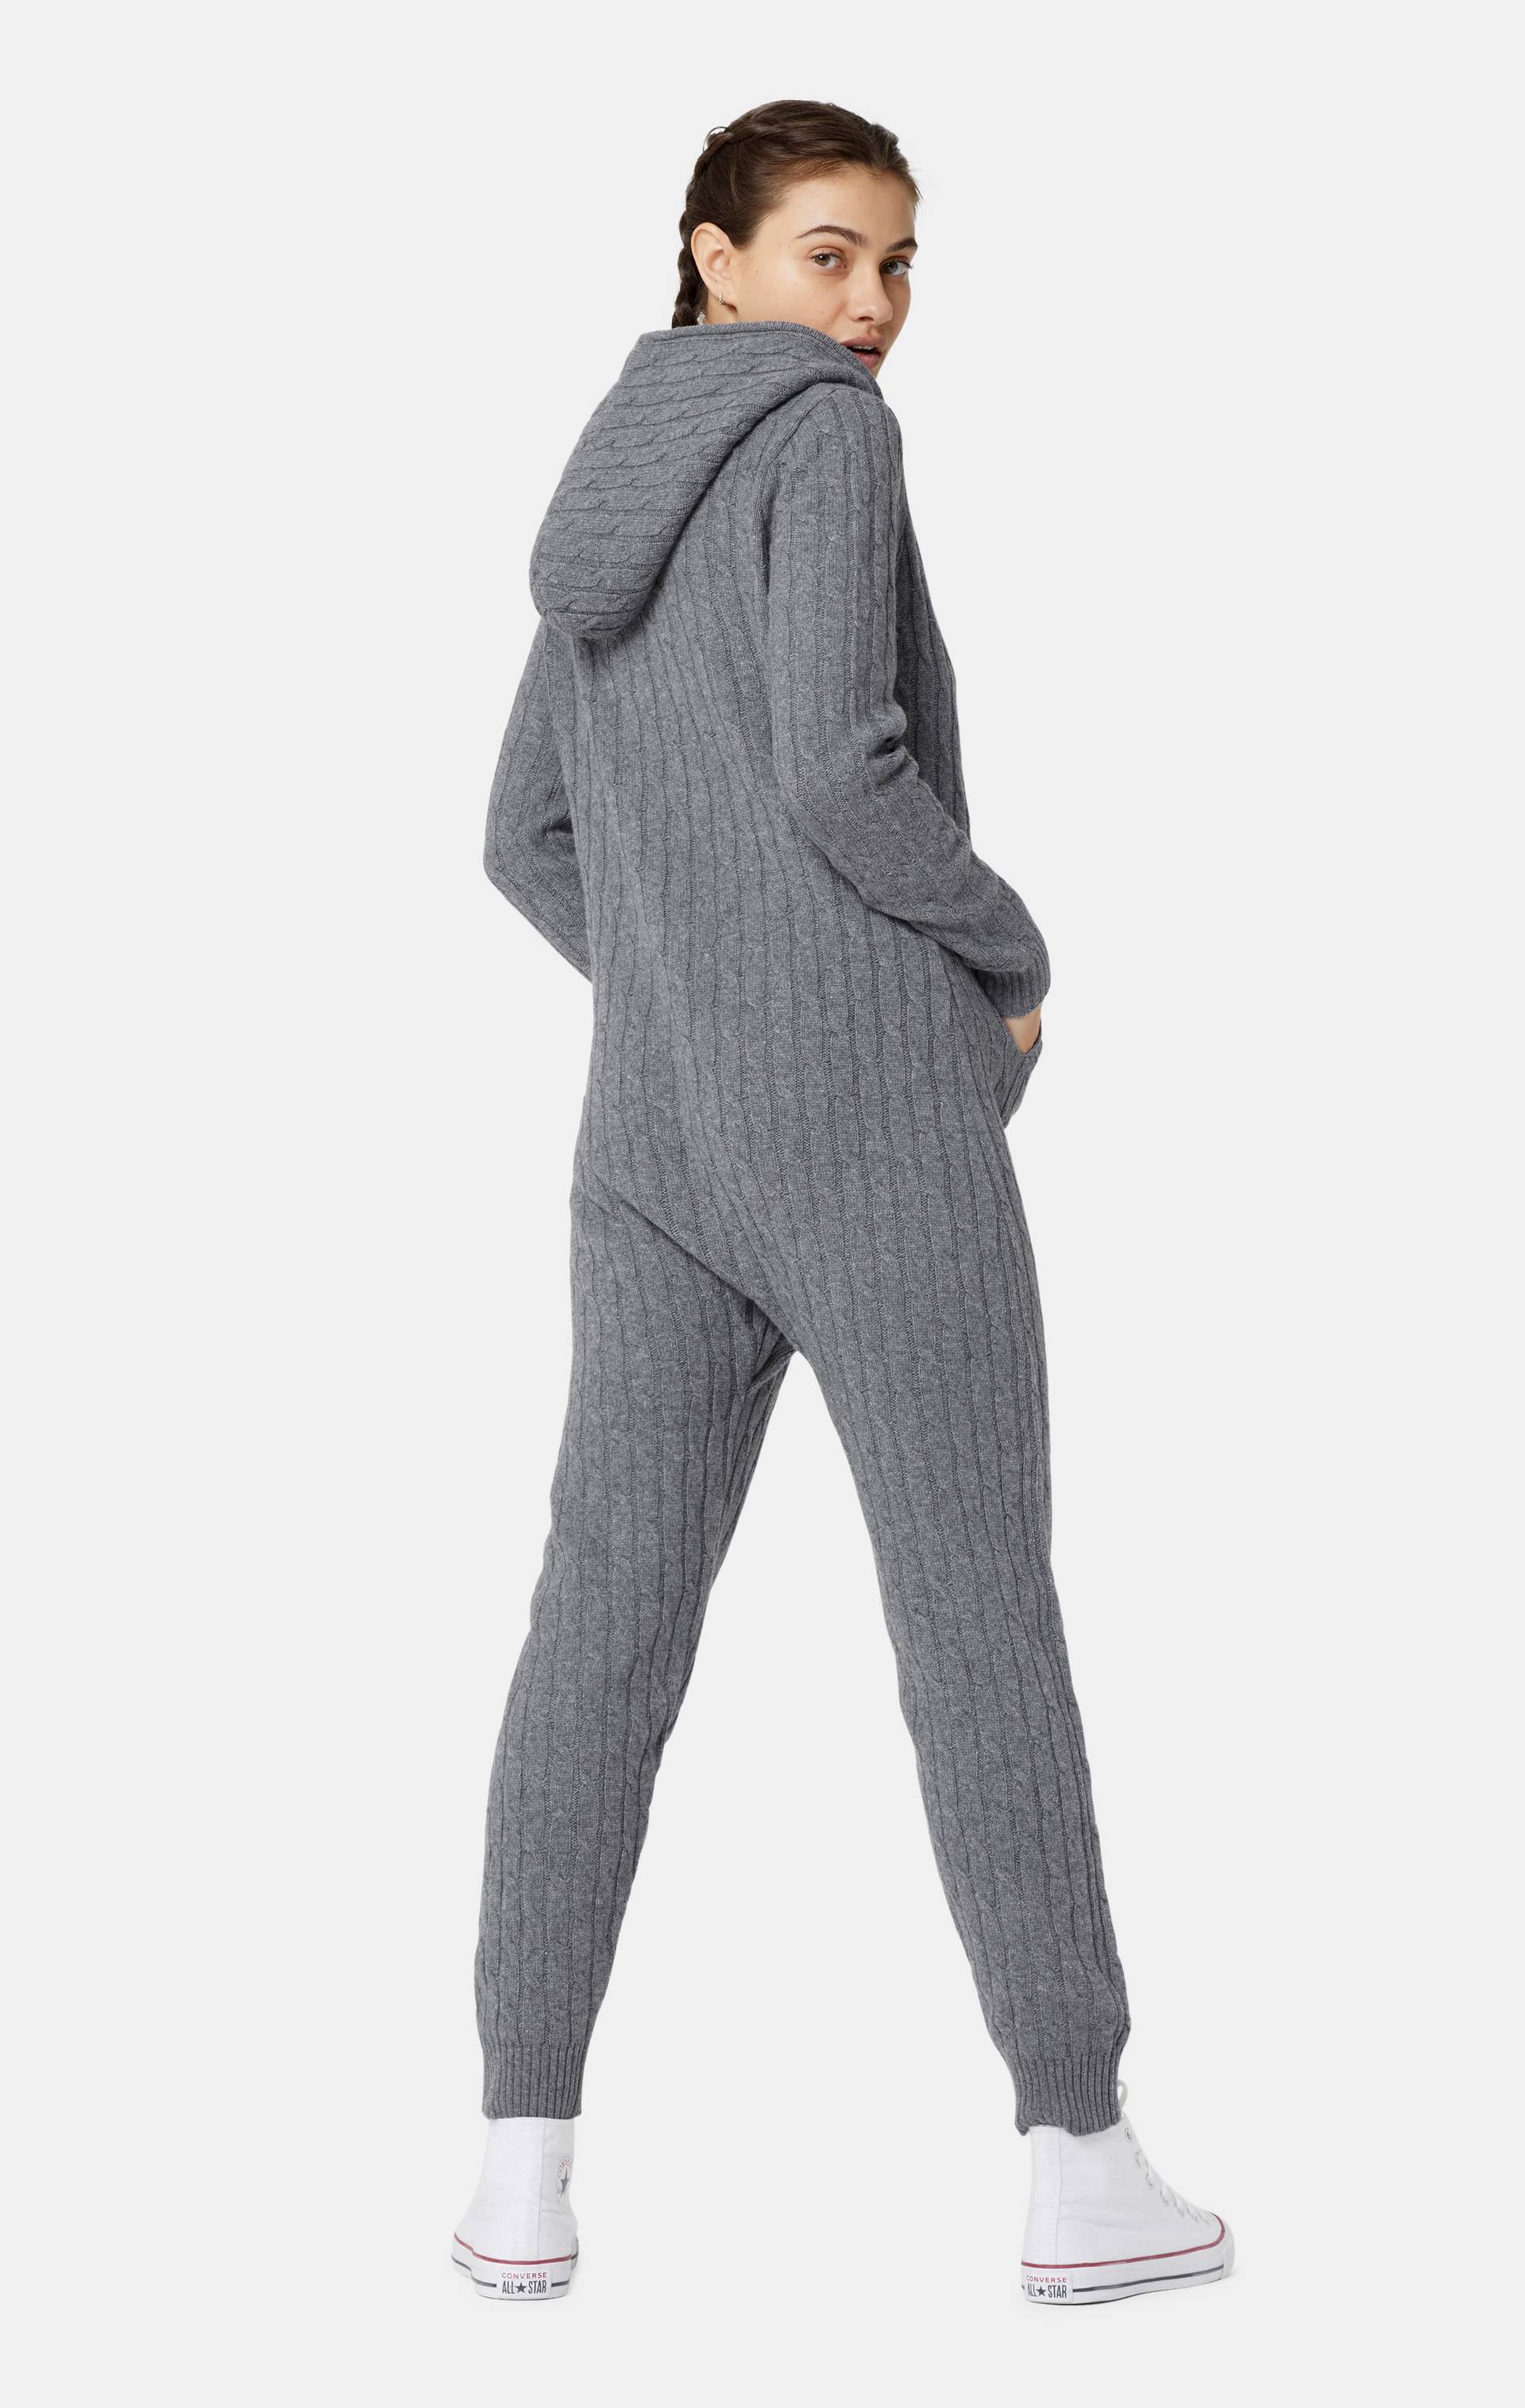 Onepiece Cable Knit Jumpsuit Dark Grey - 12